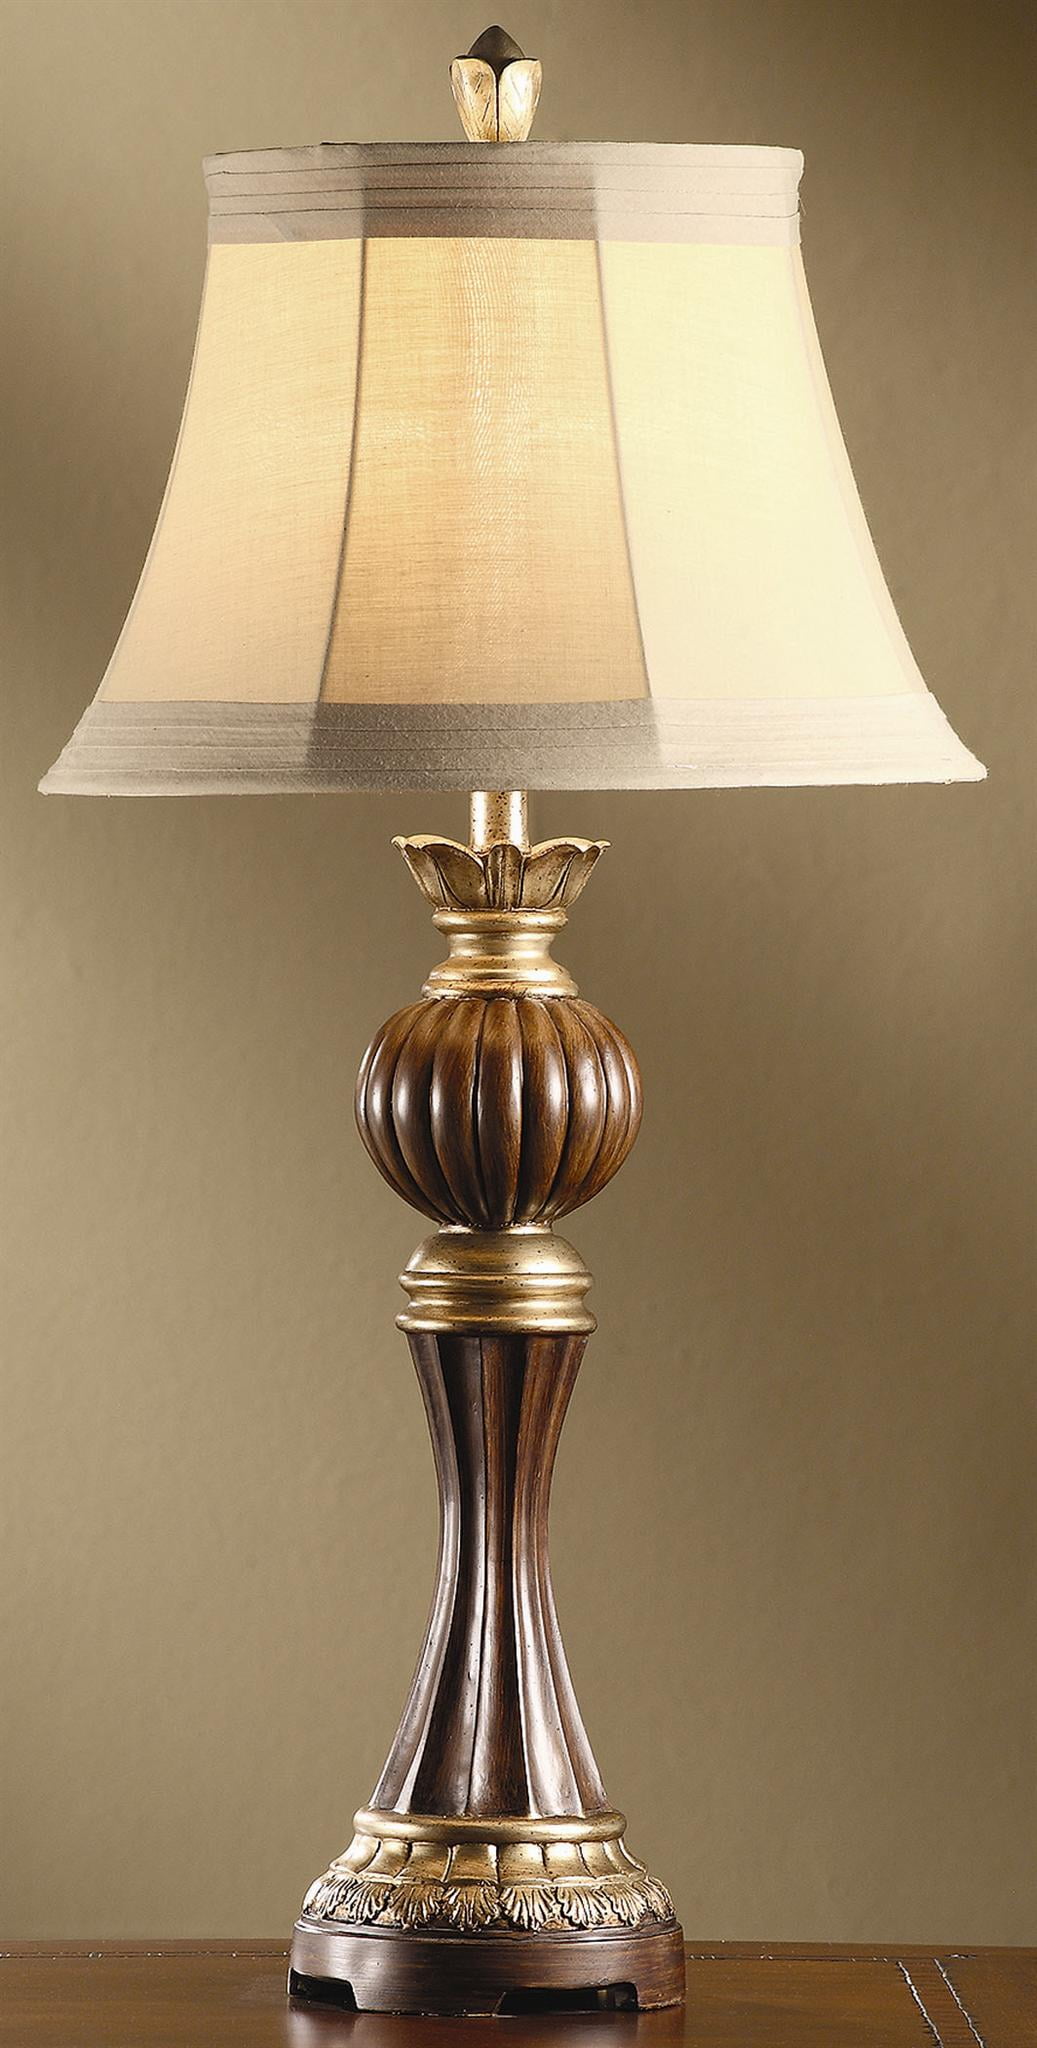 Bailey 34-Inch Table Lamp, Merlot and 